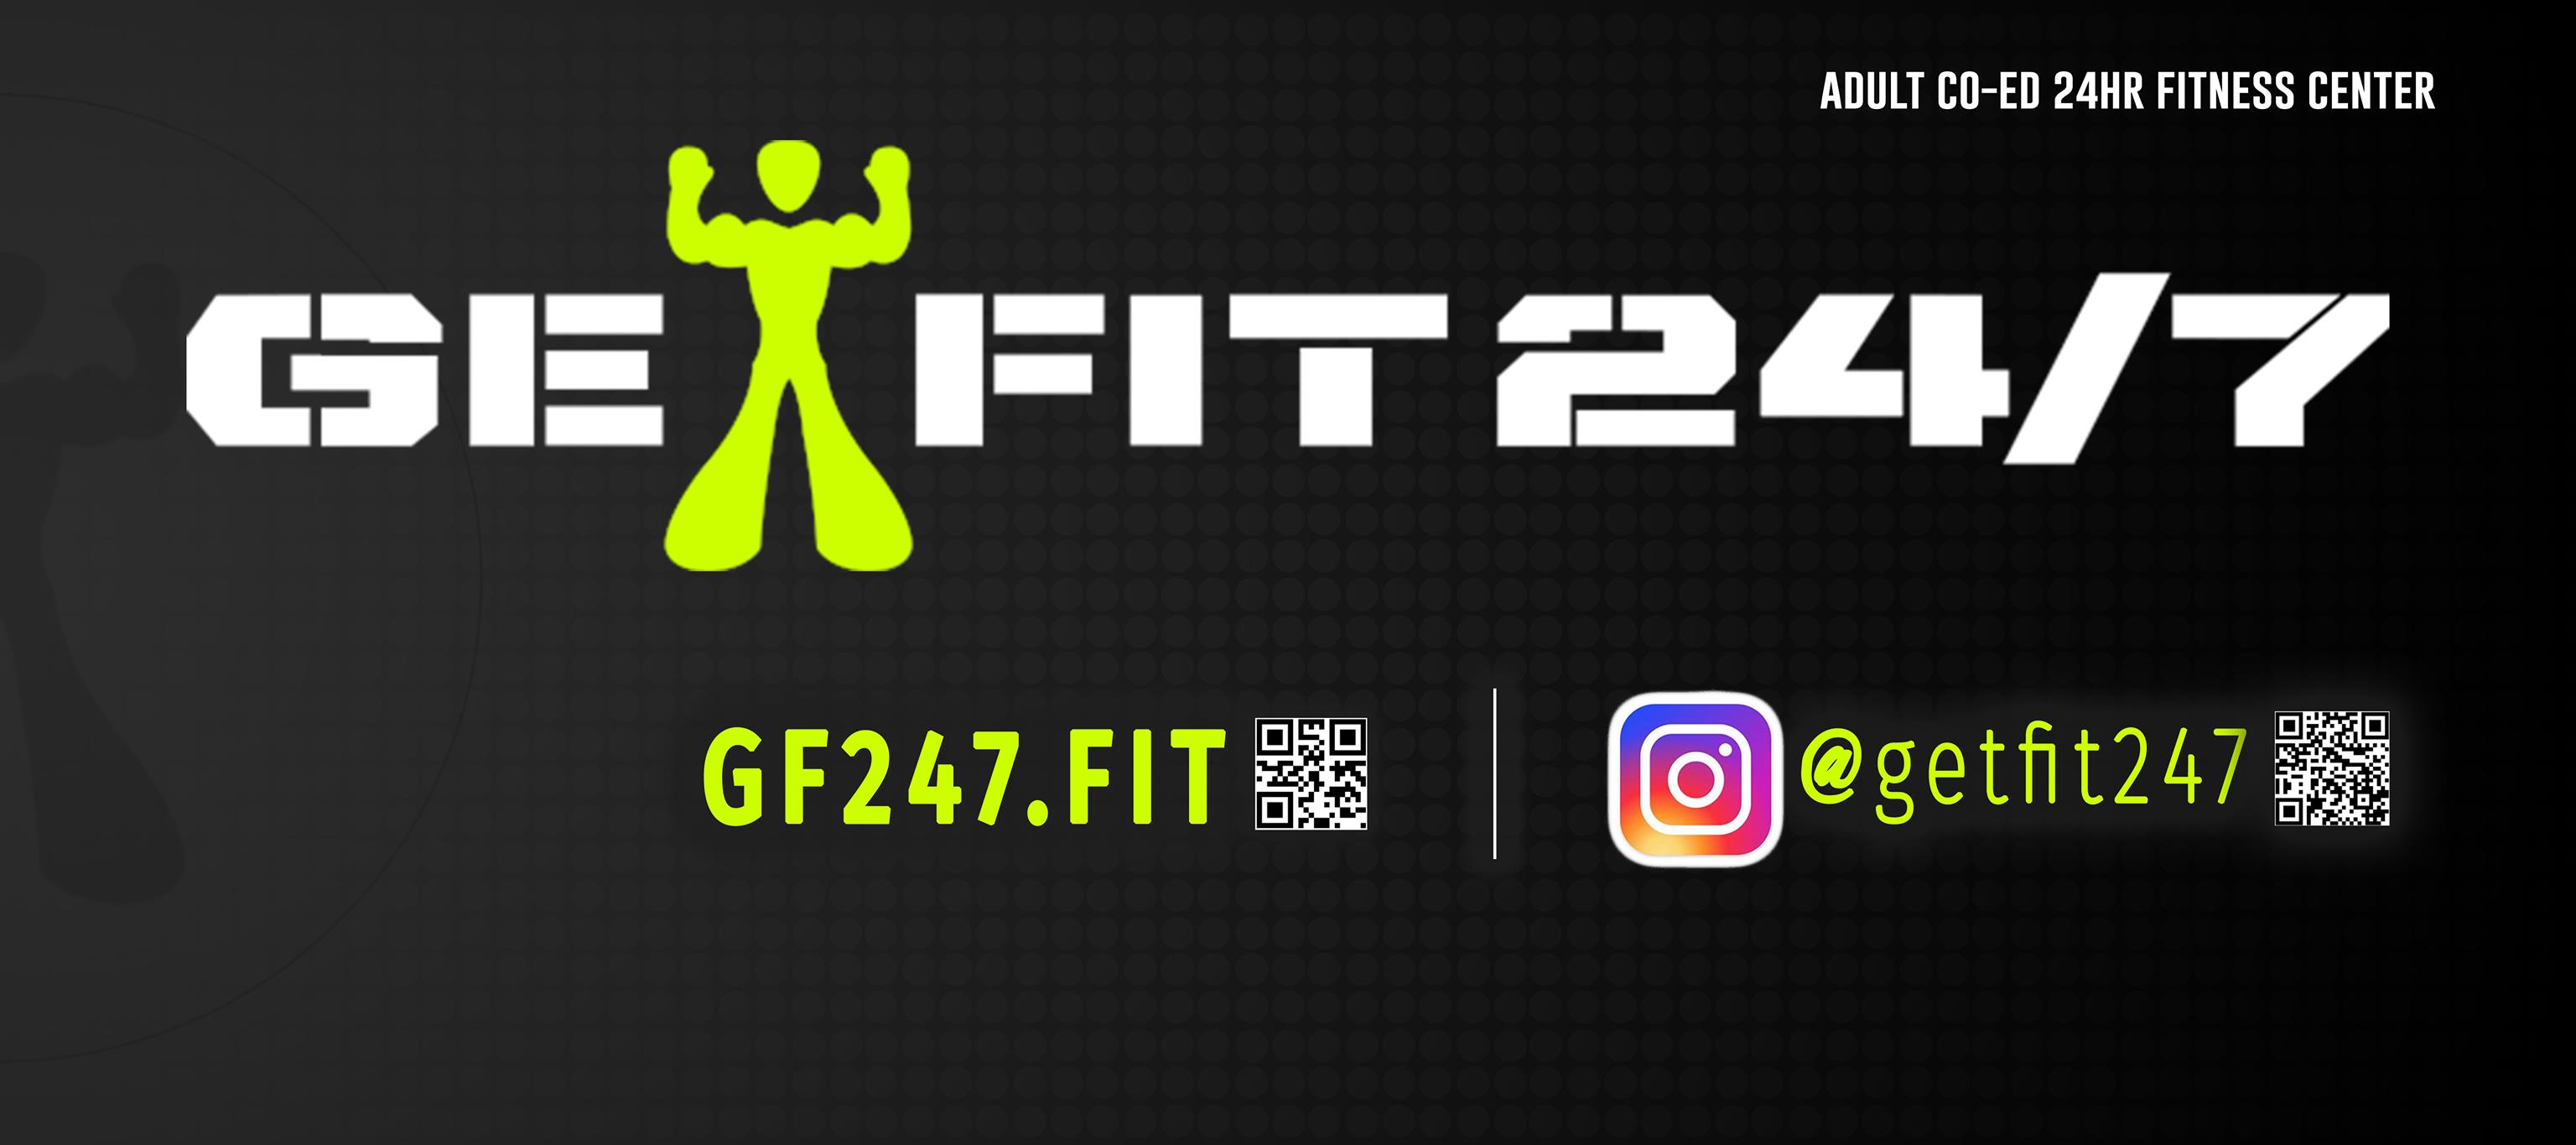 Get Fit 24/7 of Atwater